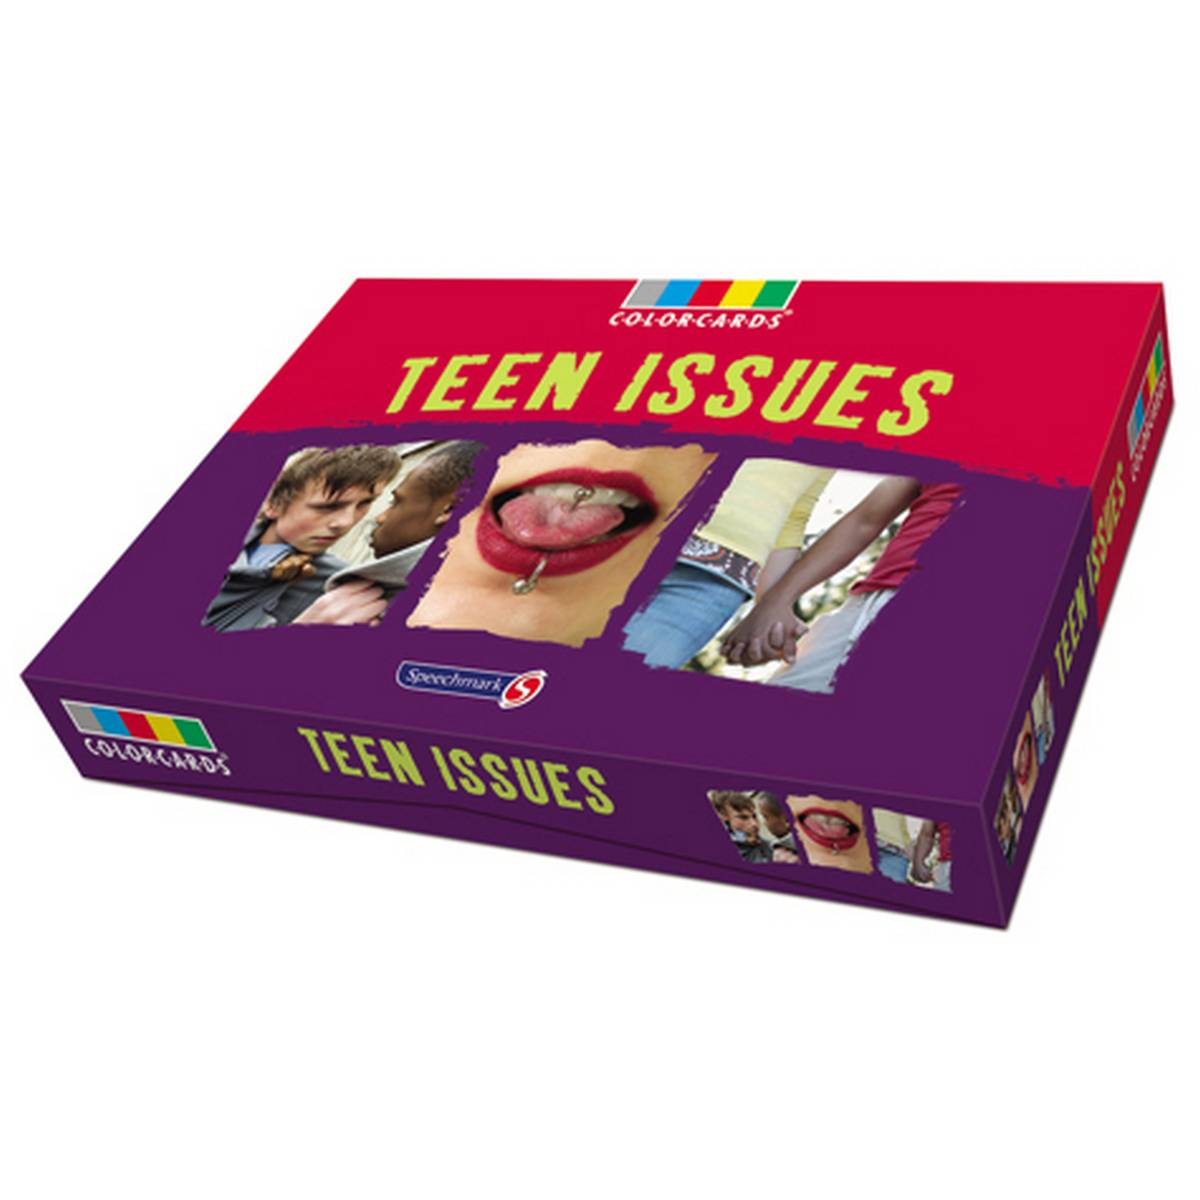 Colorcards: Teen Issues